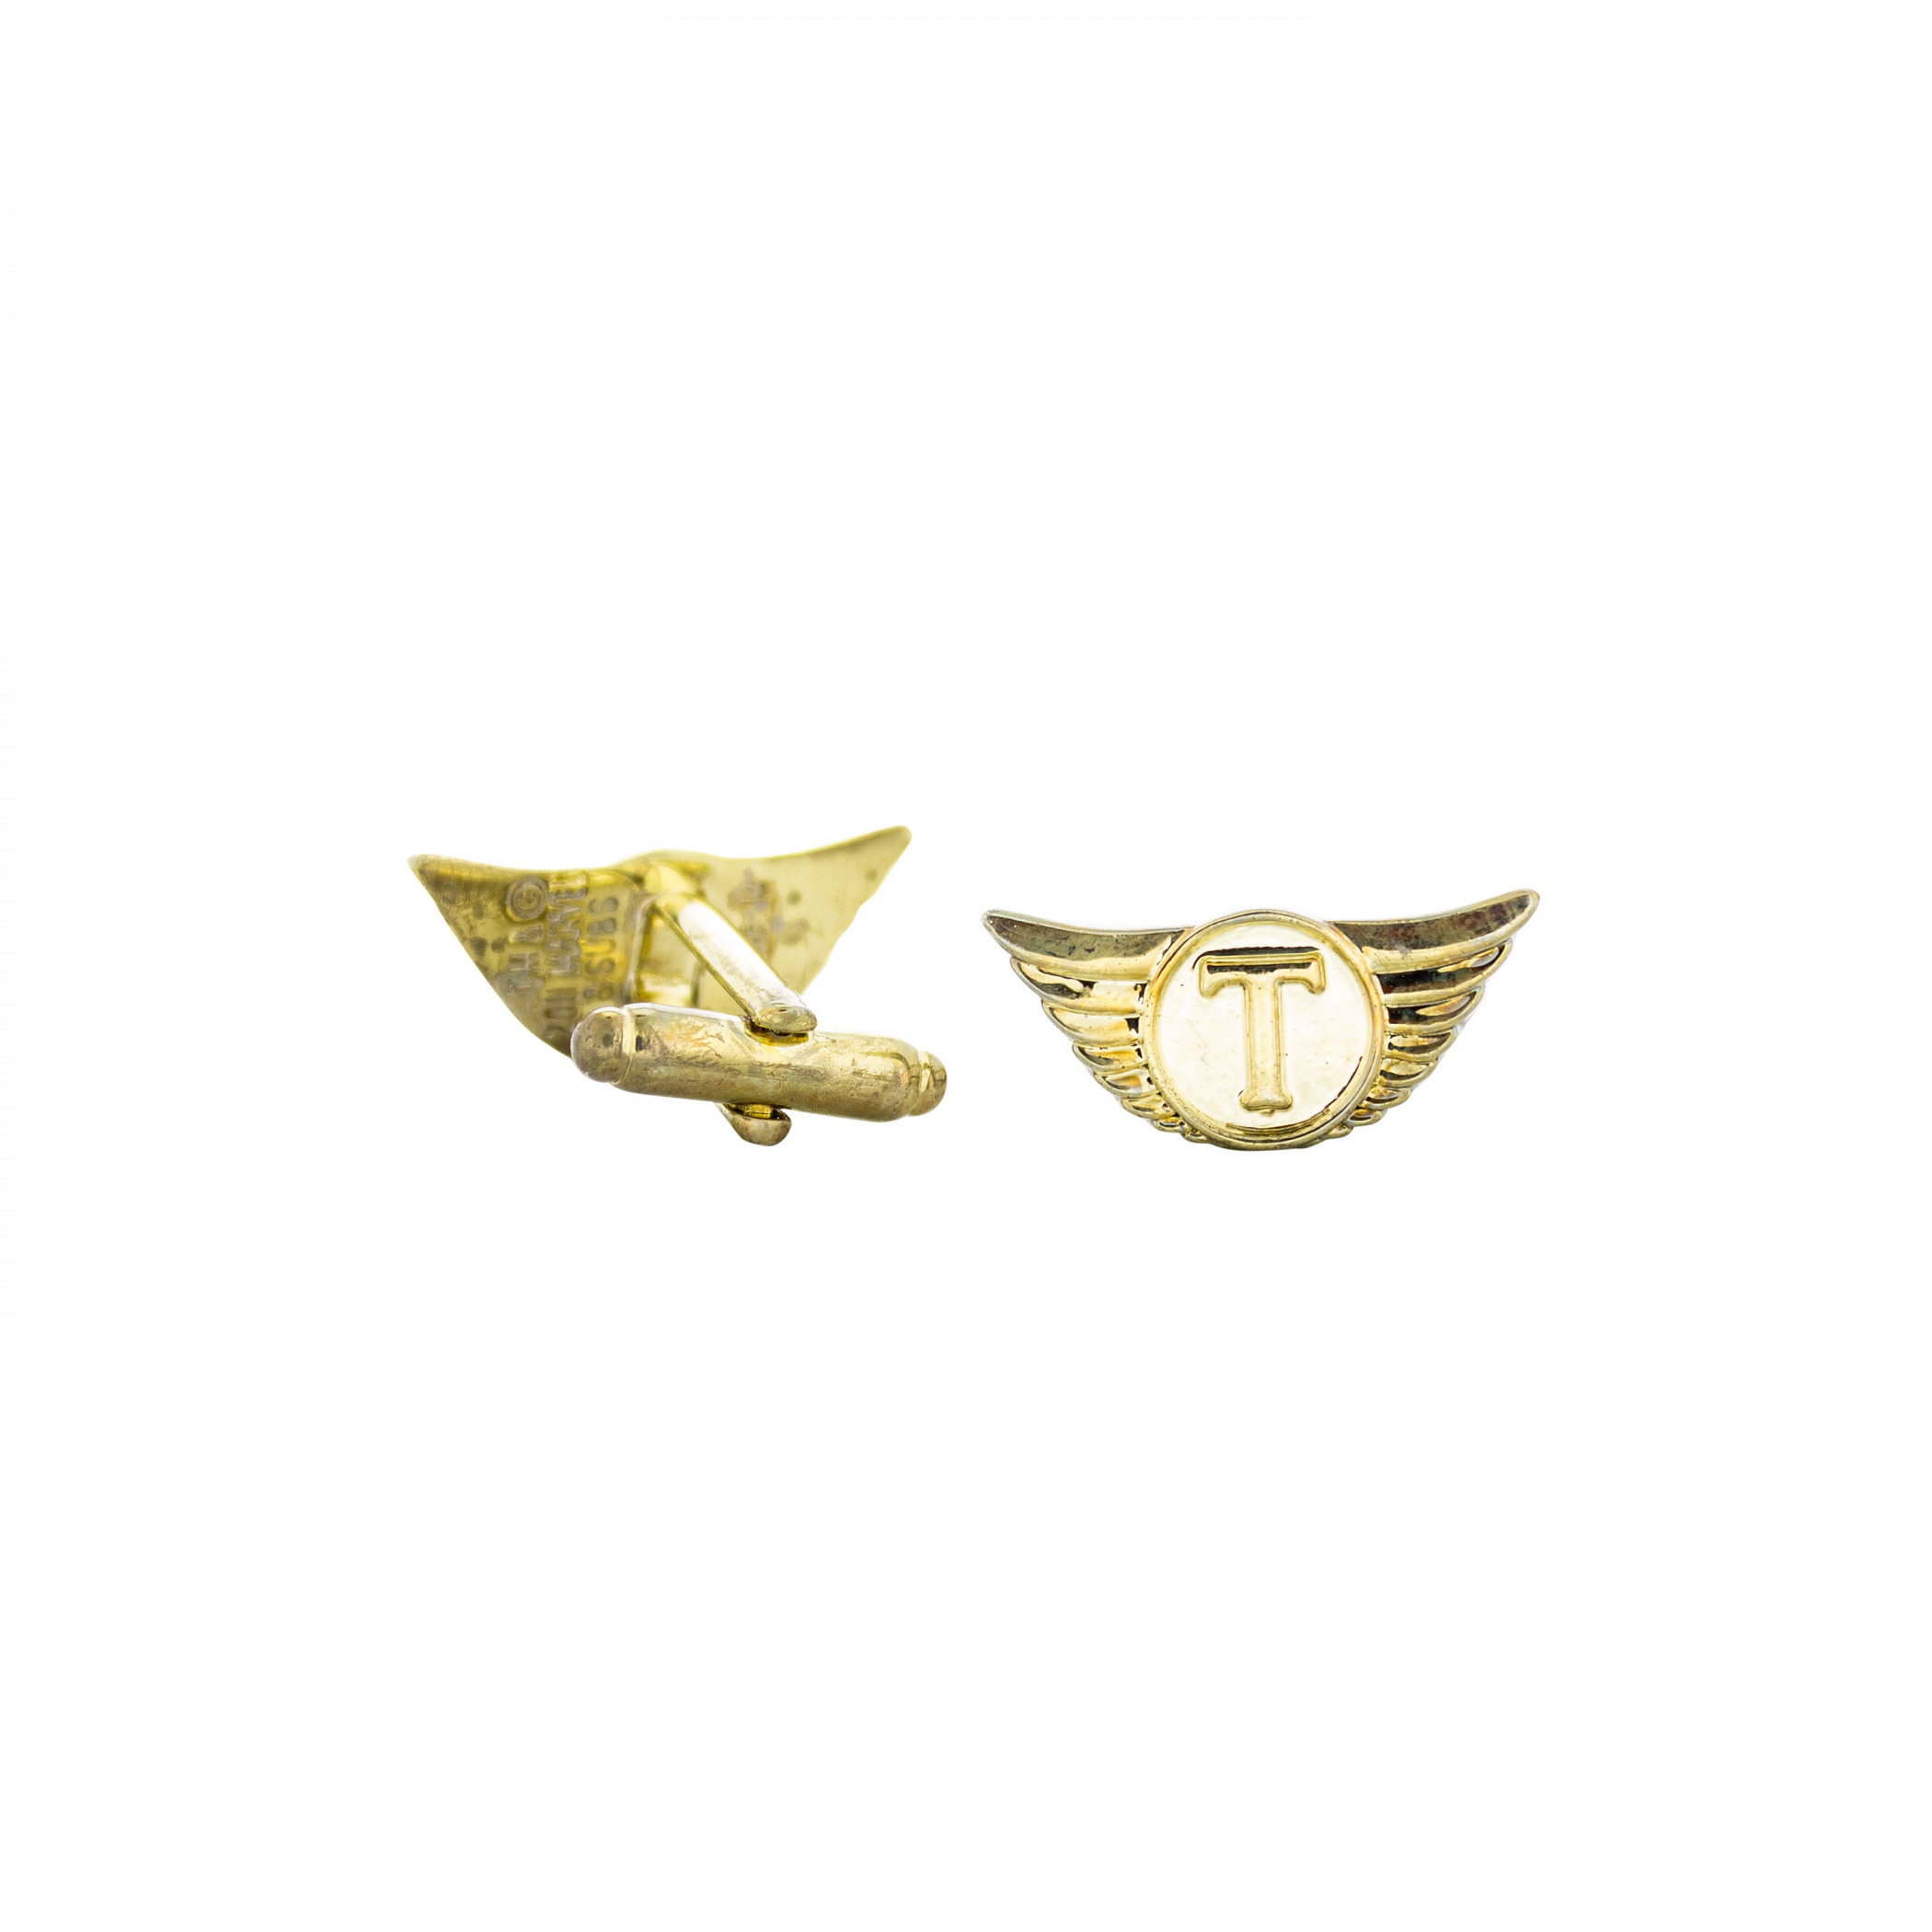 Thor Gold-Tone Cuff Links & Keychain Boxed Set